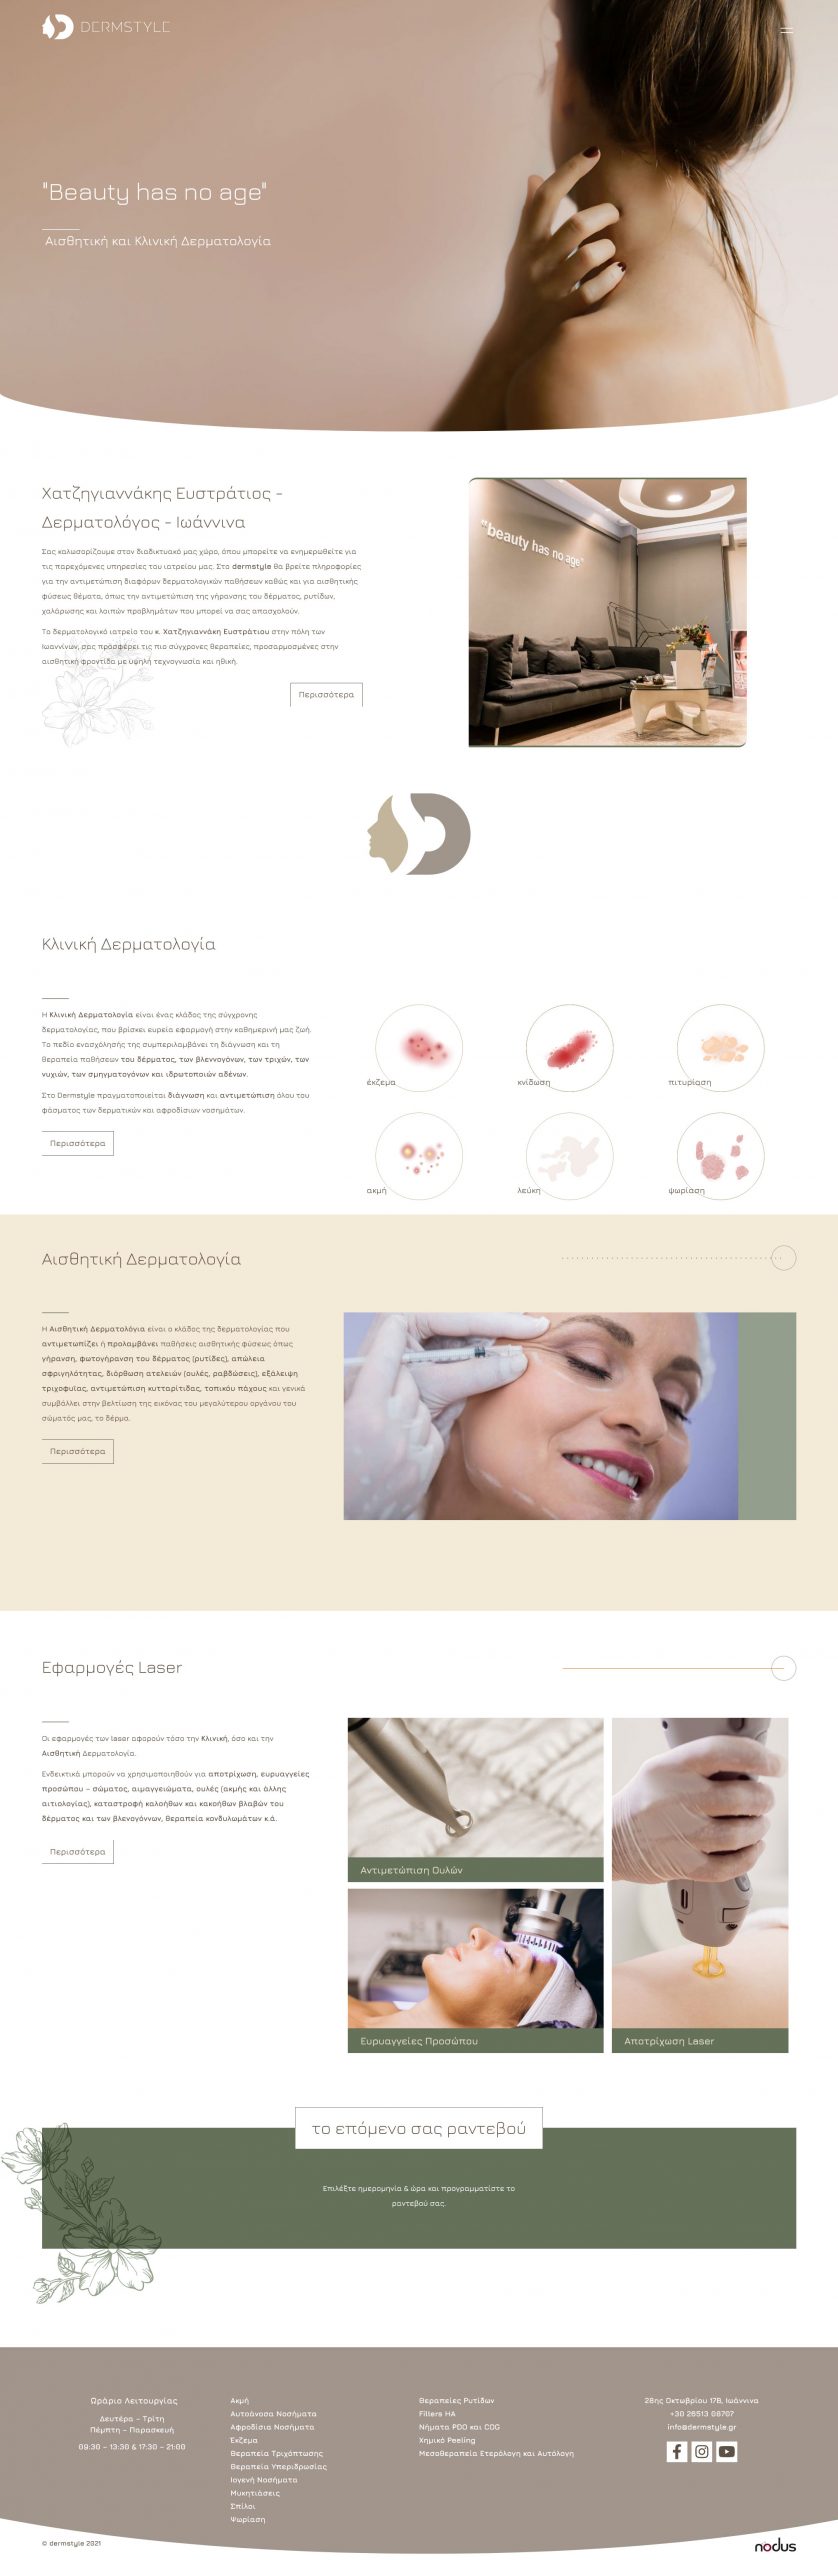 dermstyle-page-full